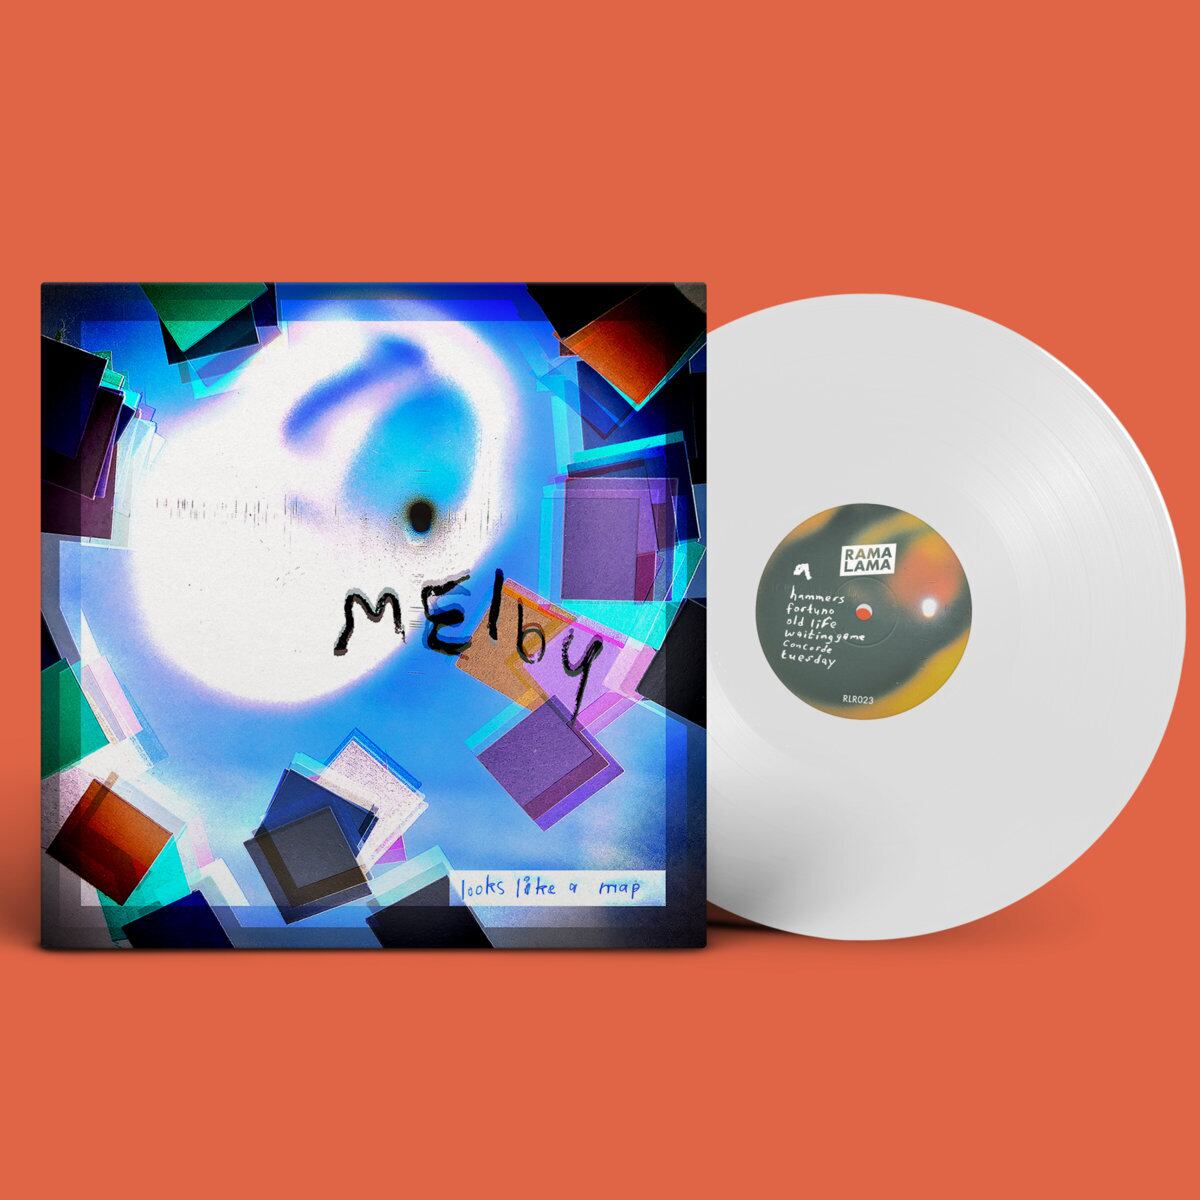 Melby / Looks like a map（500 Ltd White LP）